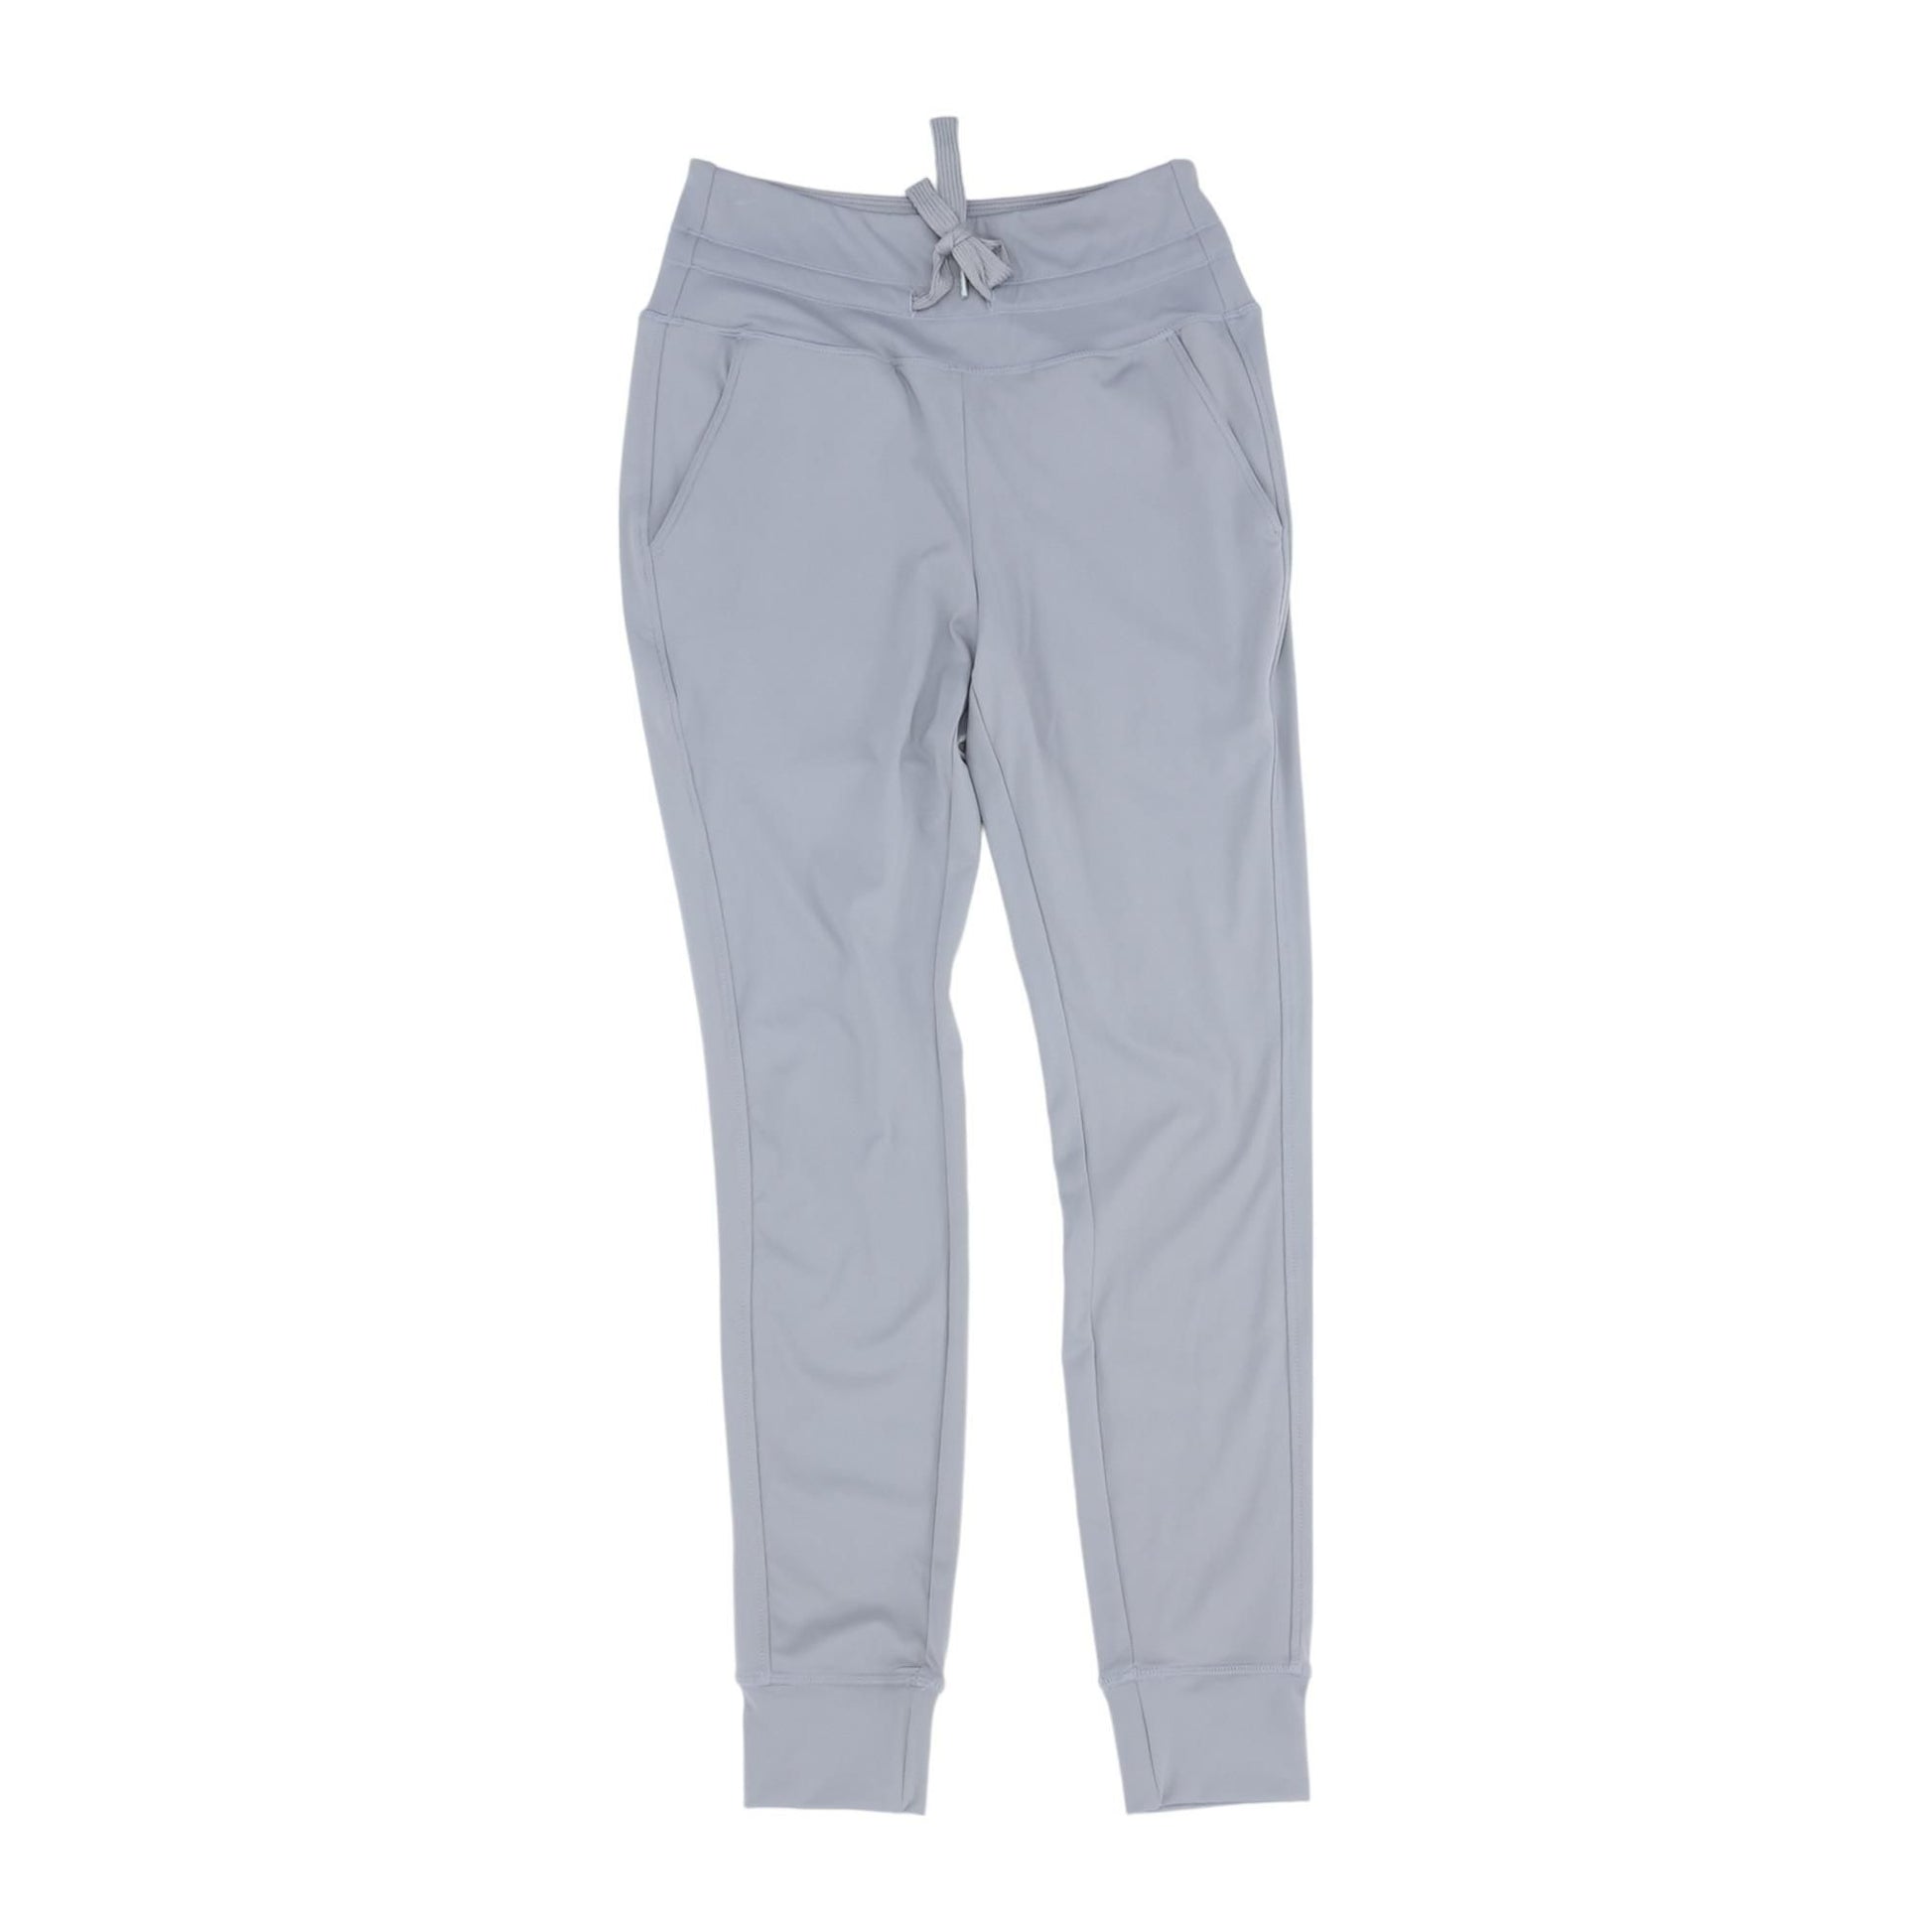 Gray Solid Joggers Pants – Unclaimed Baggage